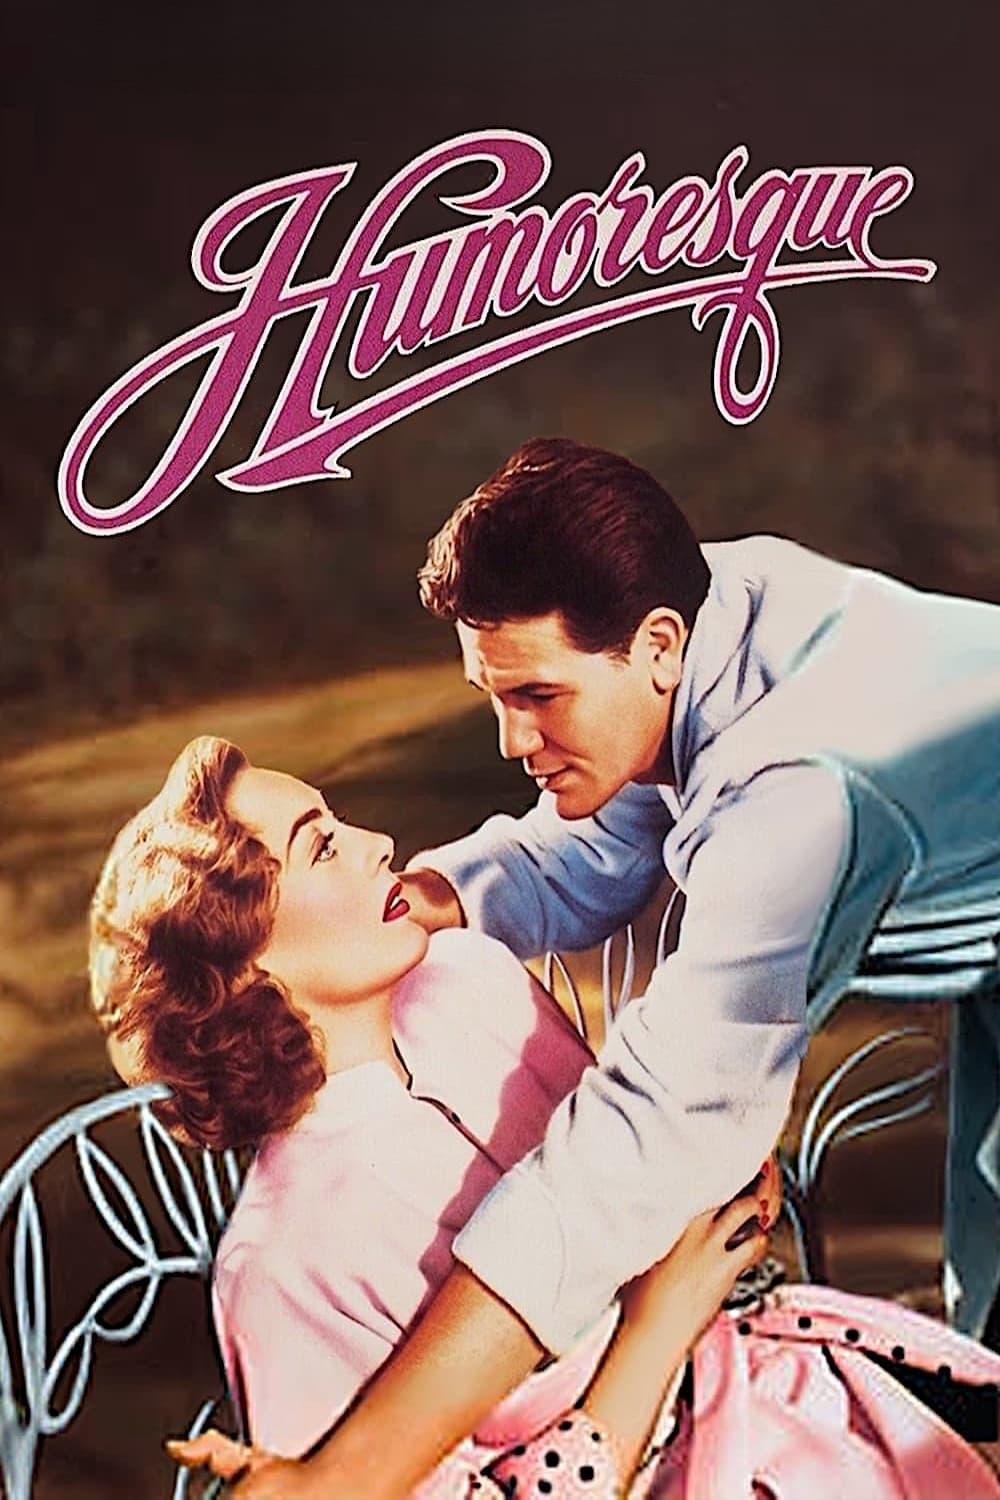 Humoresque poster